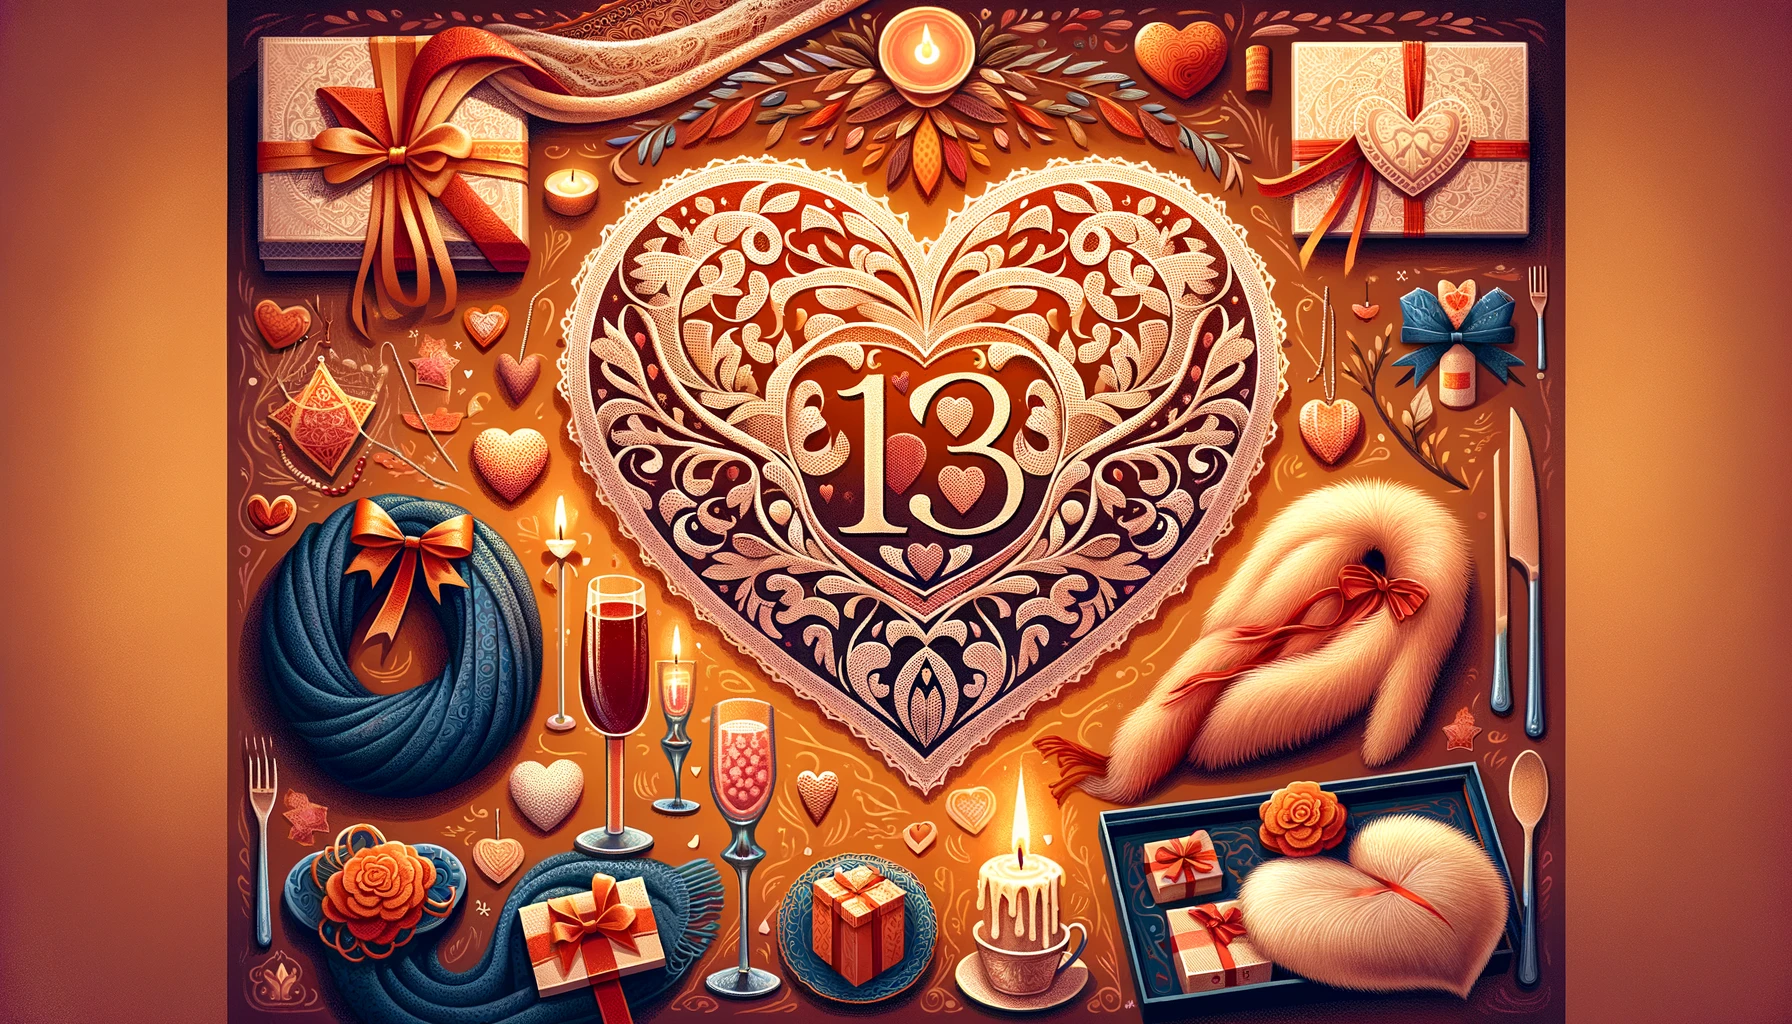 a vibrant and engaging featured image for an article on 13th wedding anniversary gift ideas and tips.